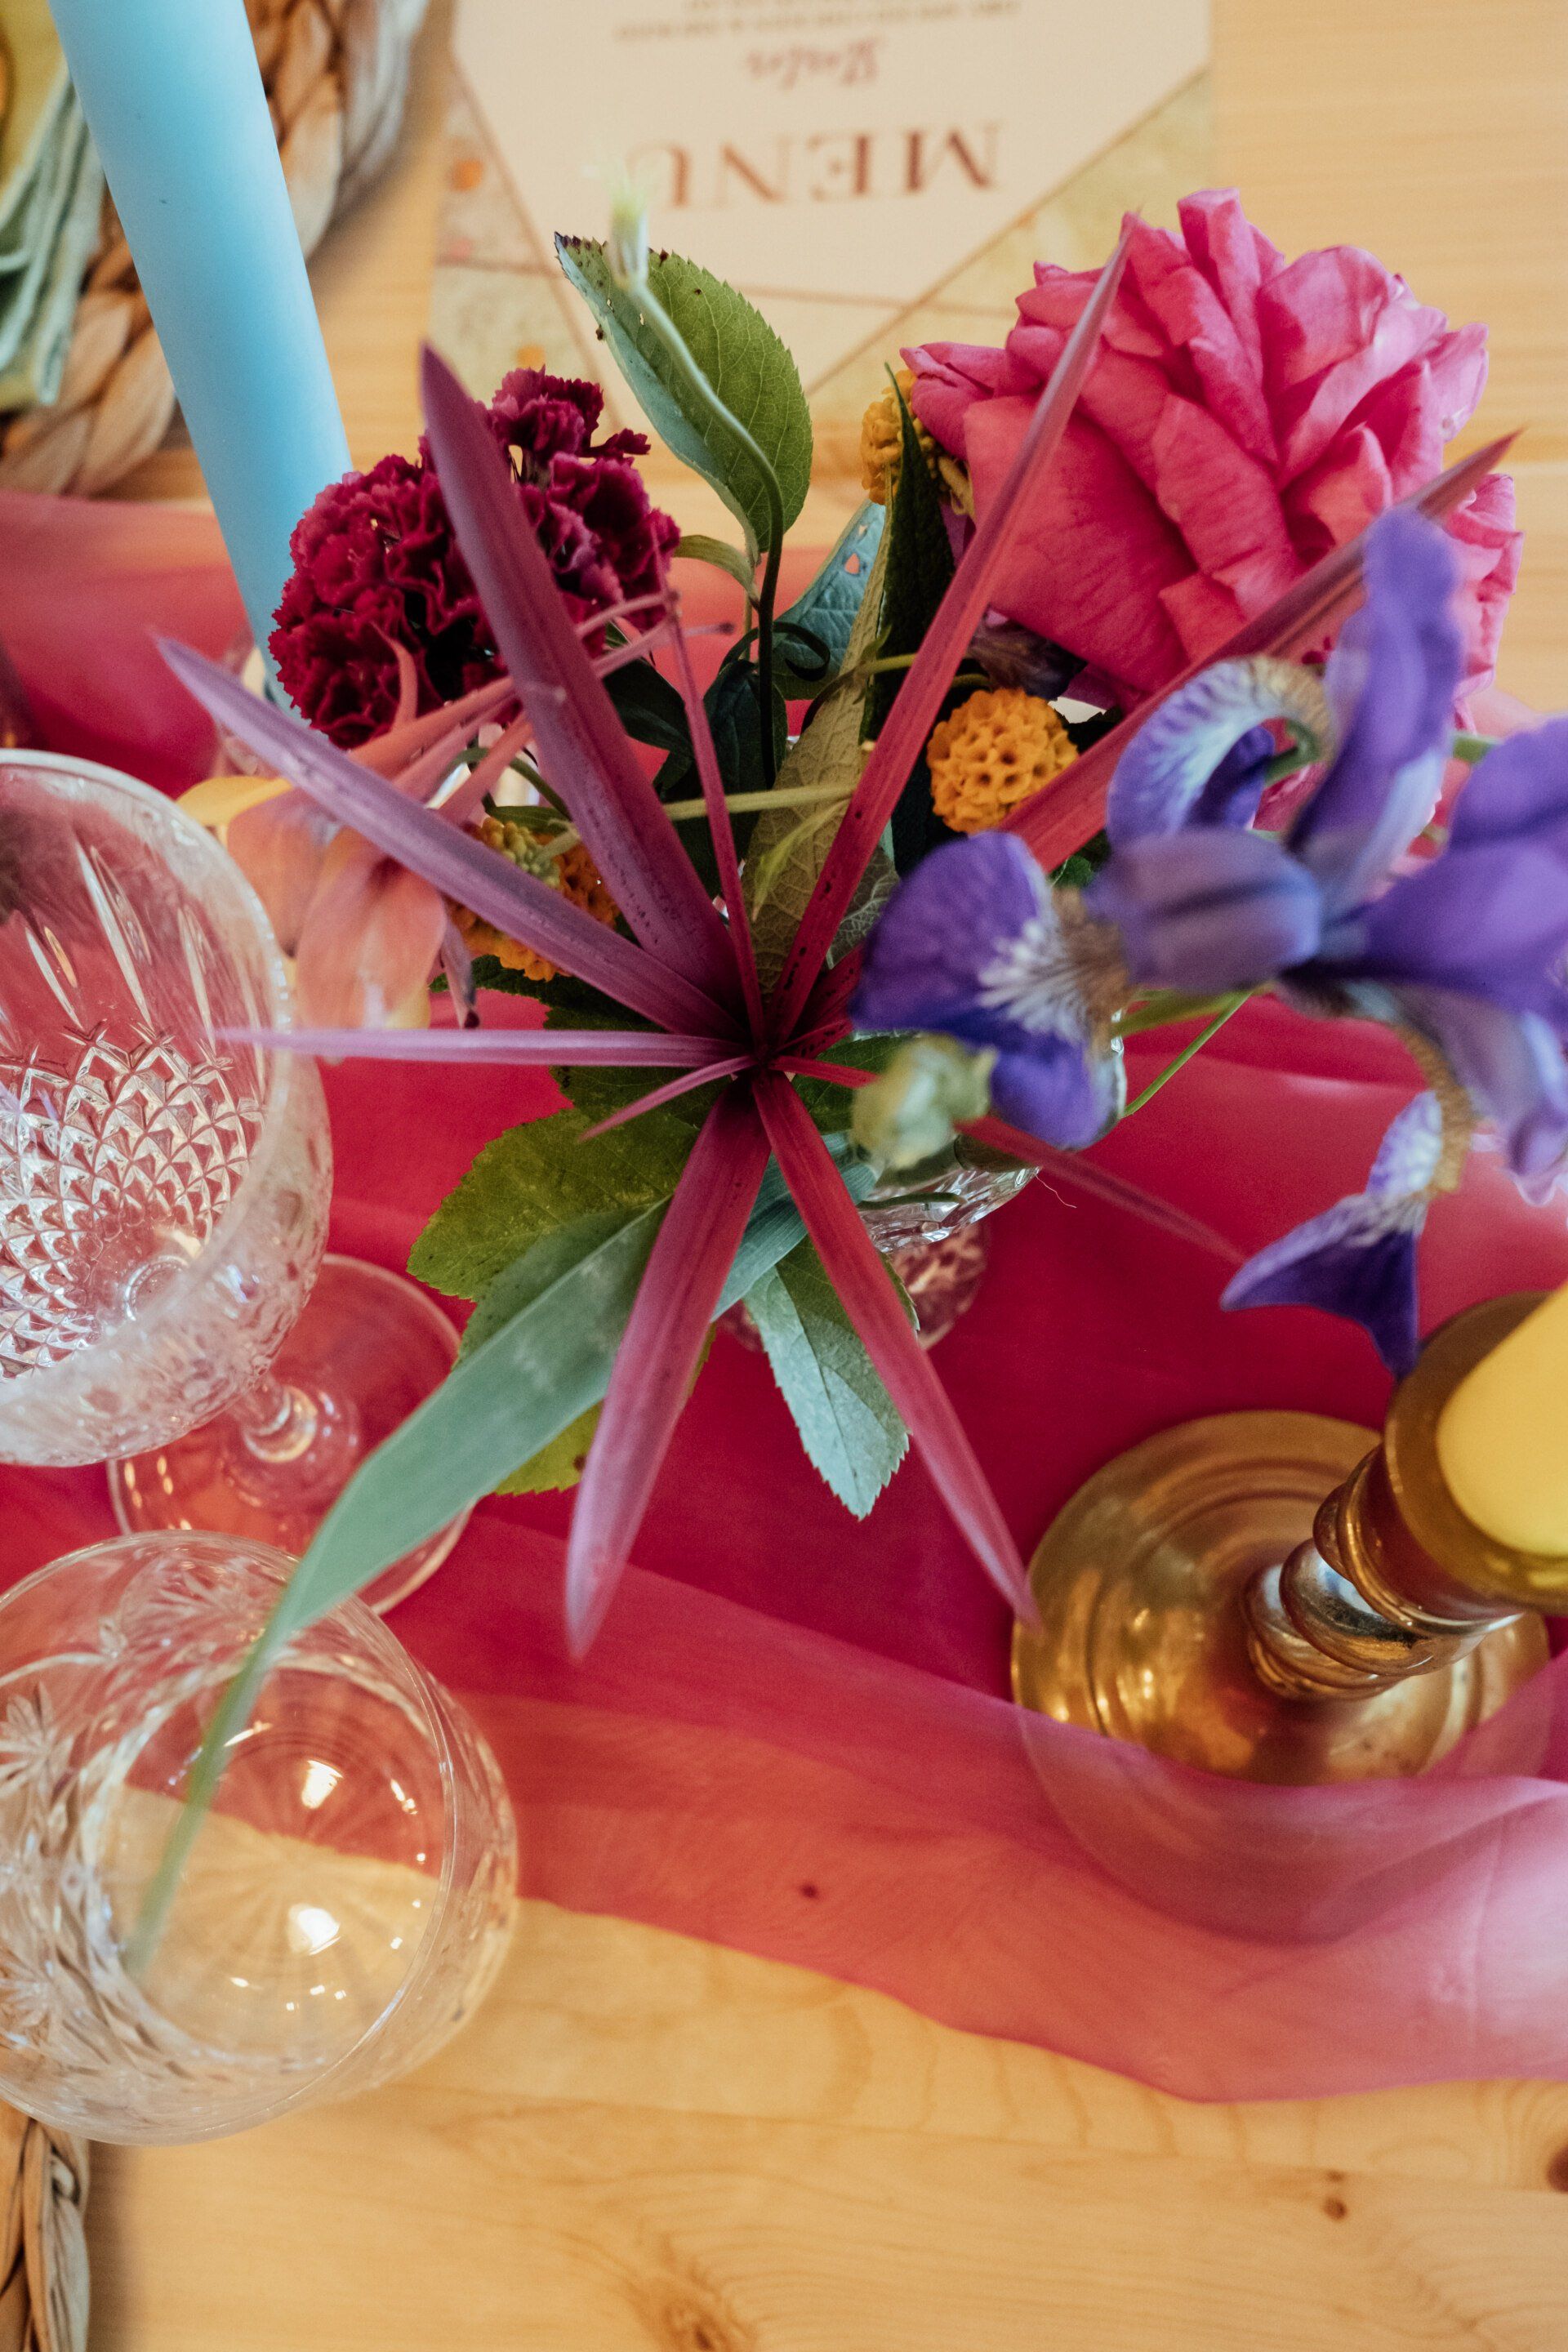 Colourful table flowers for wedding